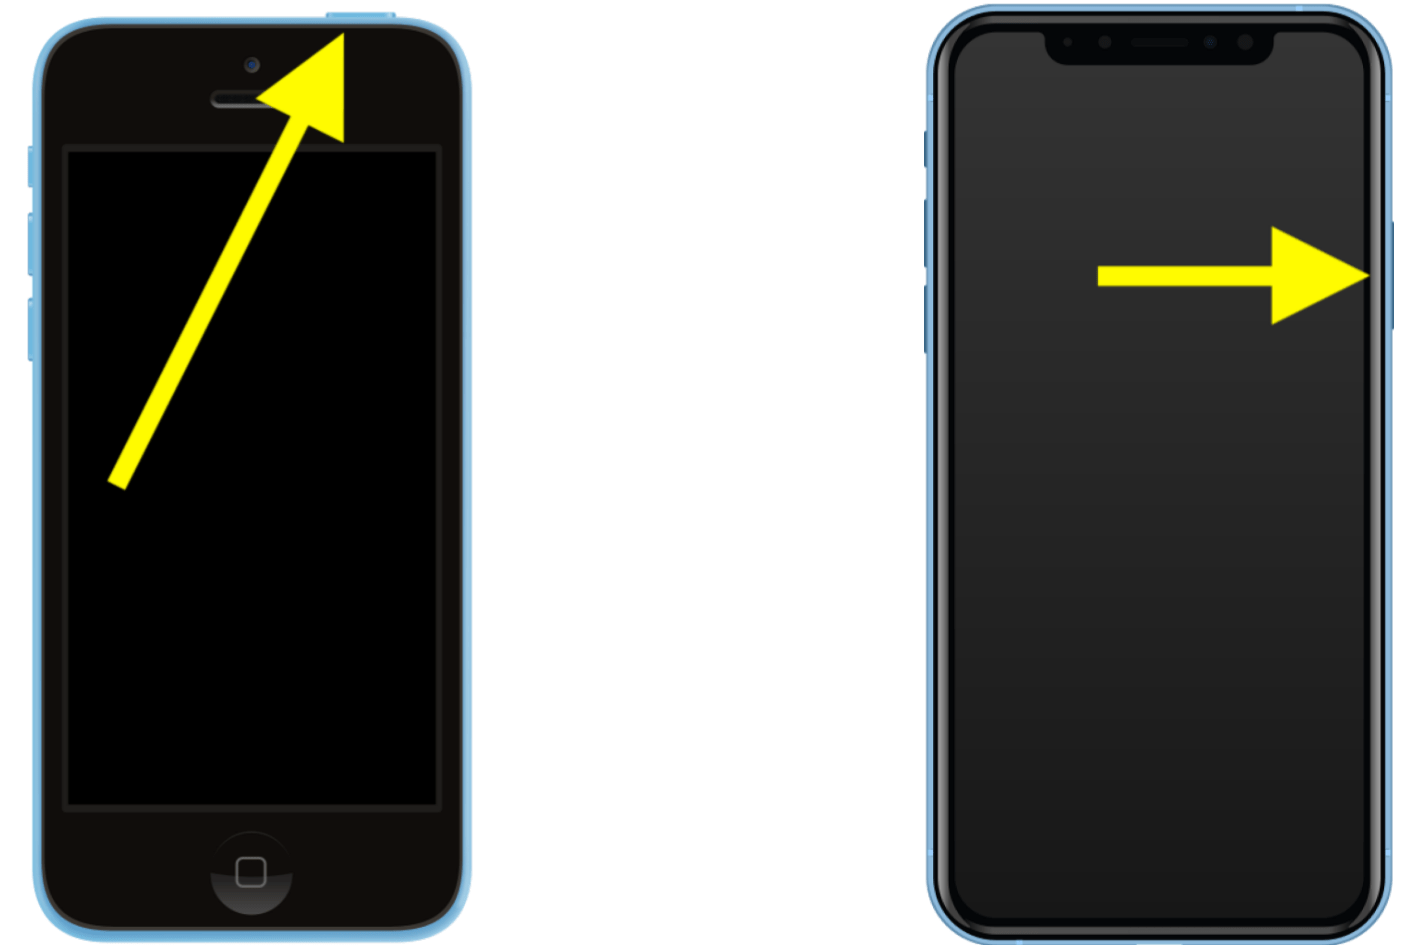 Photos of iPhones showing top and side buttons